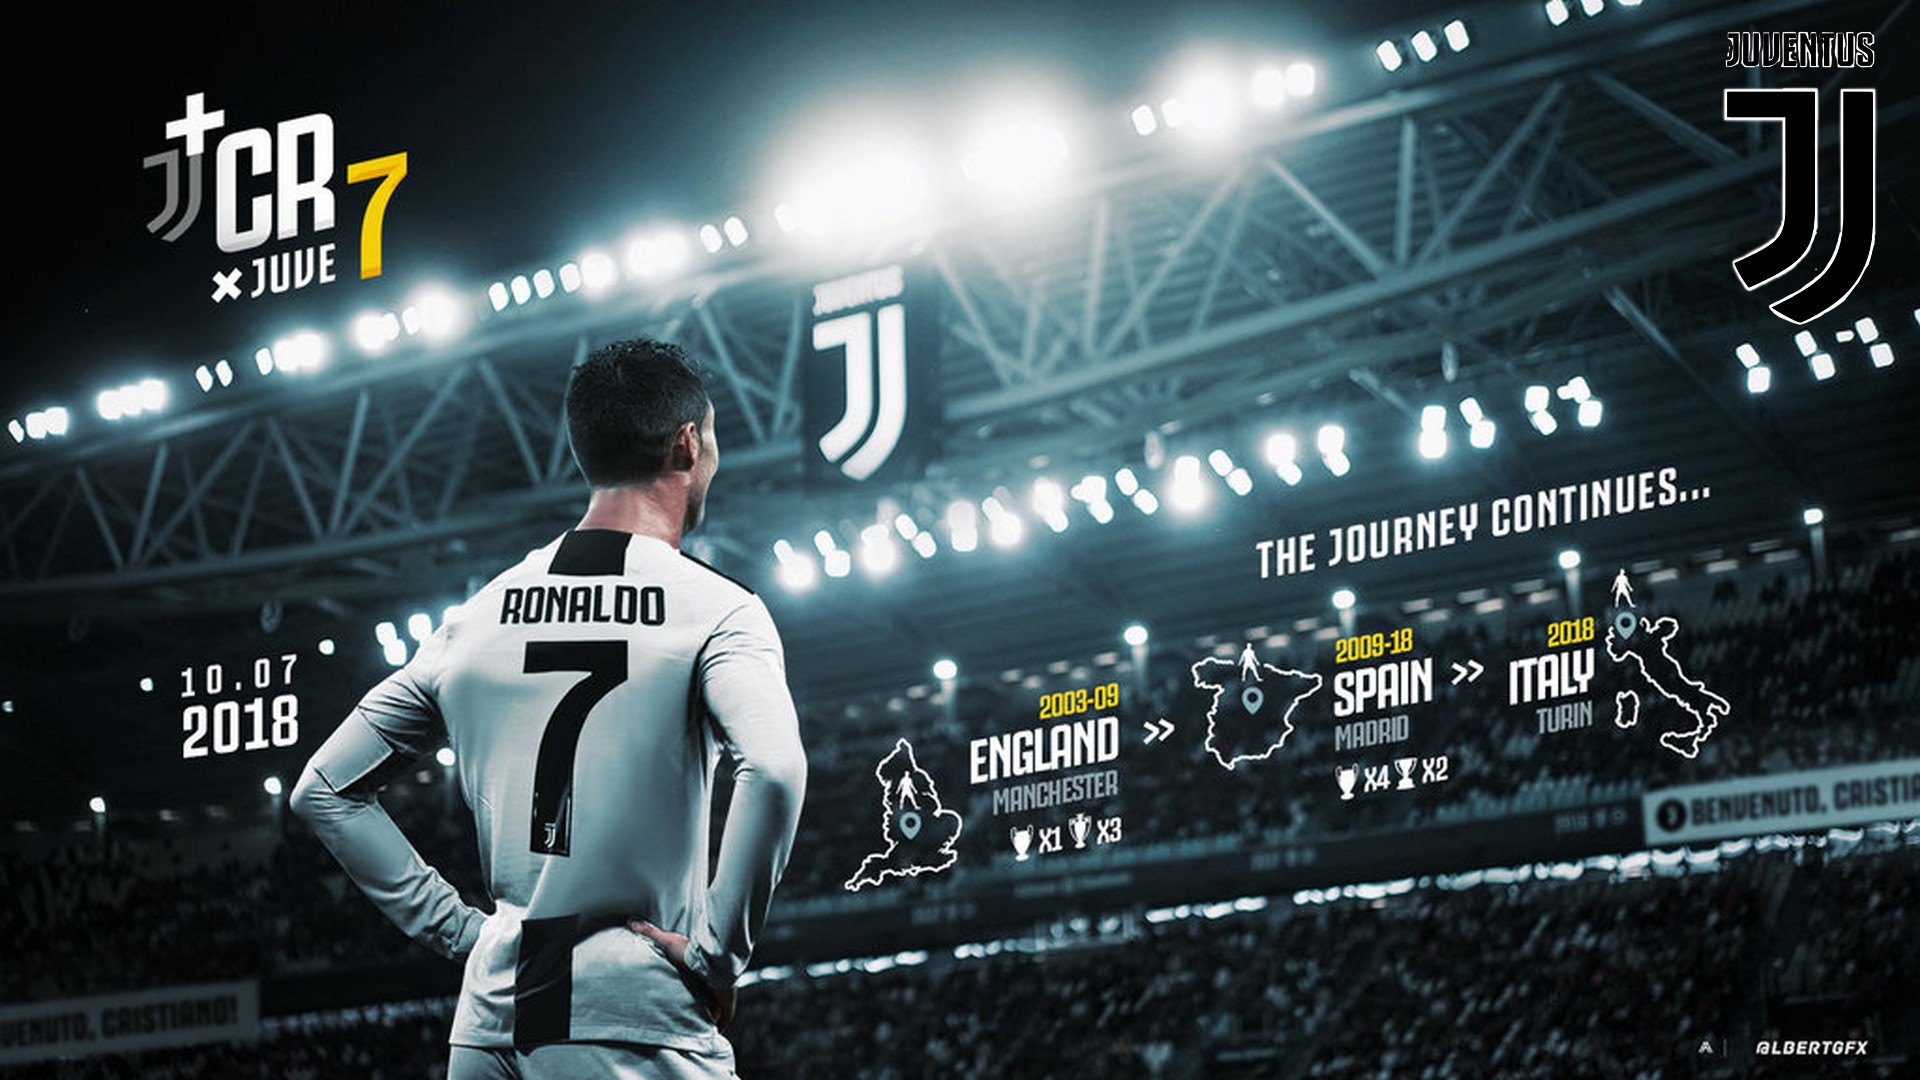 Ronaldo Juventus Wallpaper with resolution 1920x1080 pixel. You can make this wallpaper for your Mac or Windows Desktop Background, iPhone, Android or Tablet and another Smartphone device